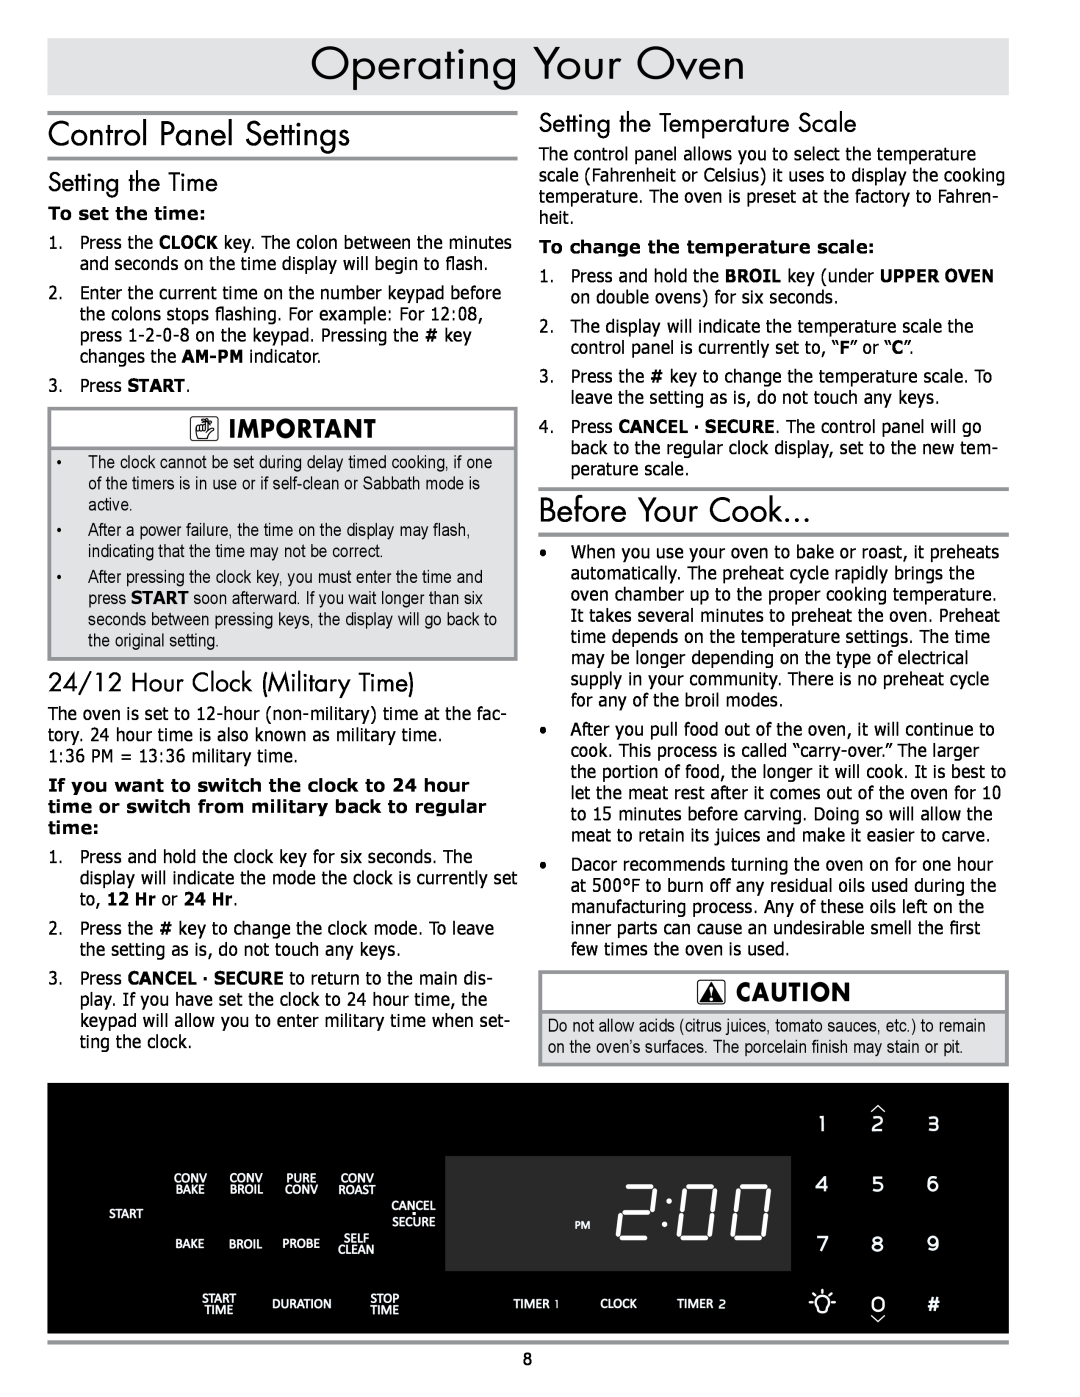 Dacor MORD230 manual Operating Your Oven, Control Panel Settings, Before Your Cook, Setting the Time, To set the time 